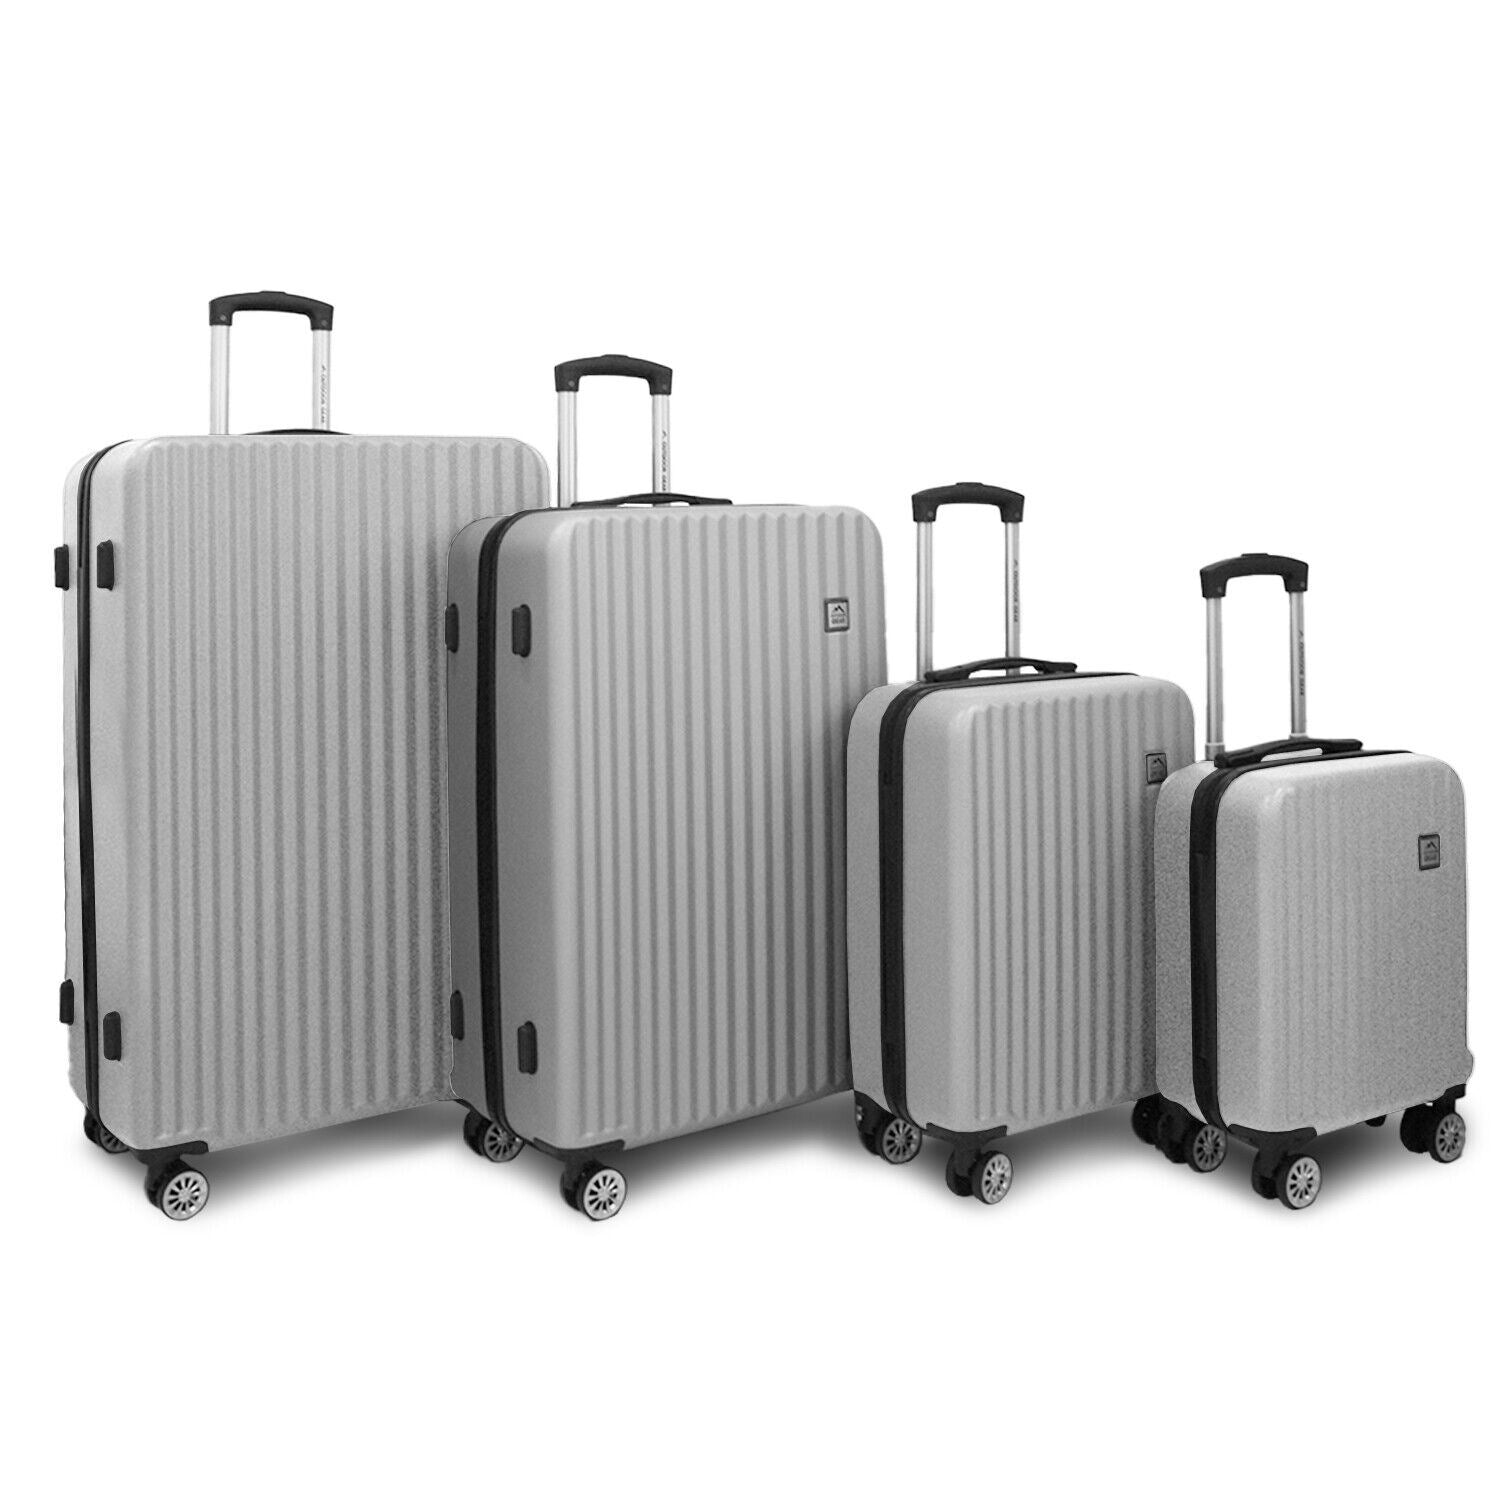 Albertville Set of 4 Hard Shell Suitcase in Silver